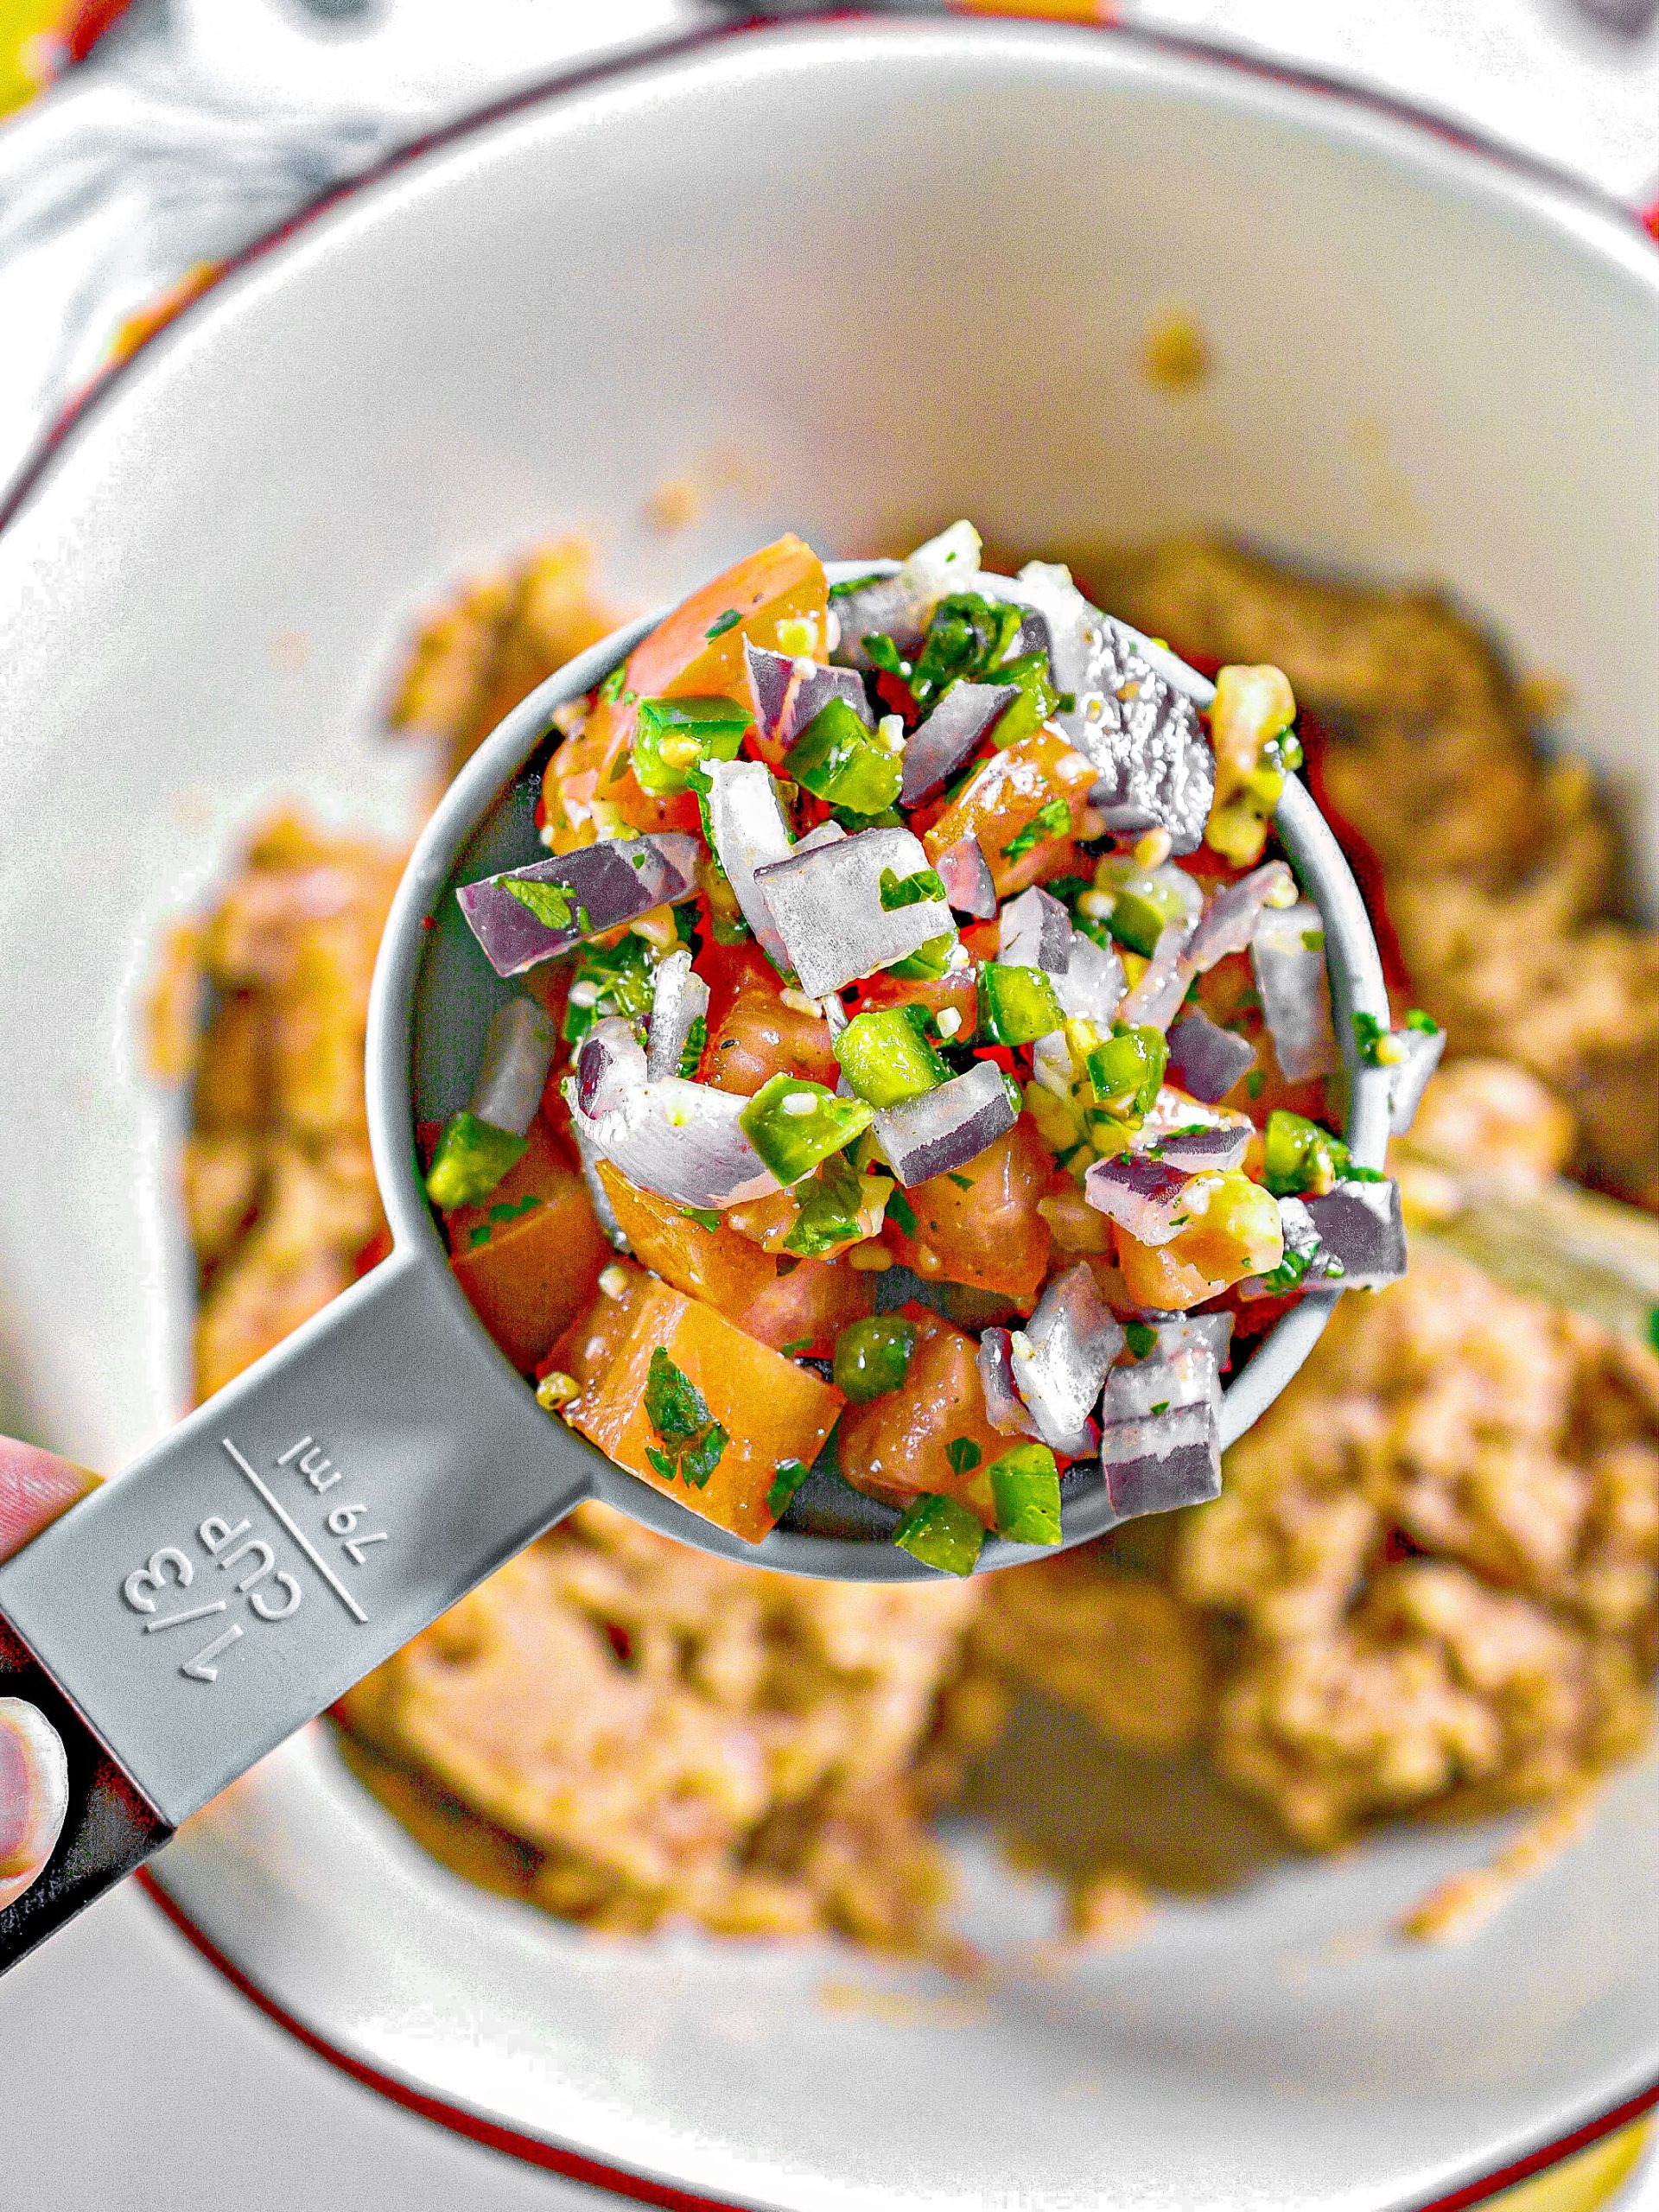 Combine the refried beans and pico de gallo or salsa in a bowl, and stir to combine.